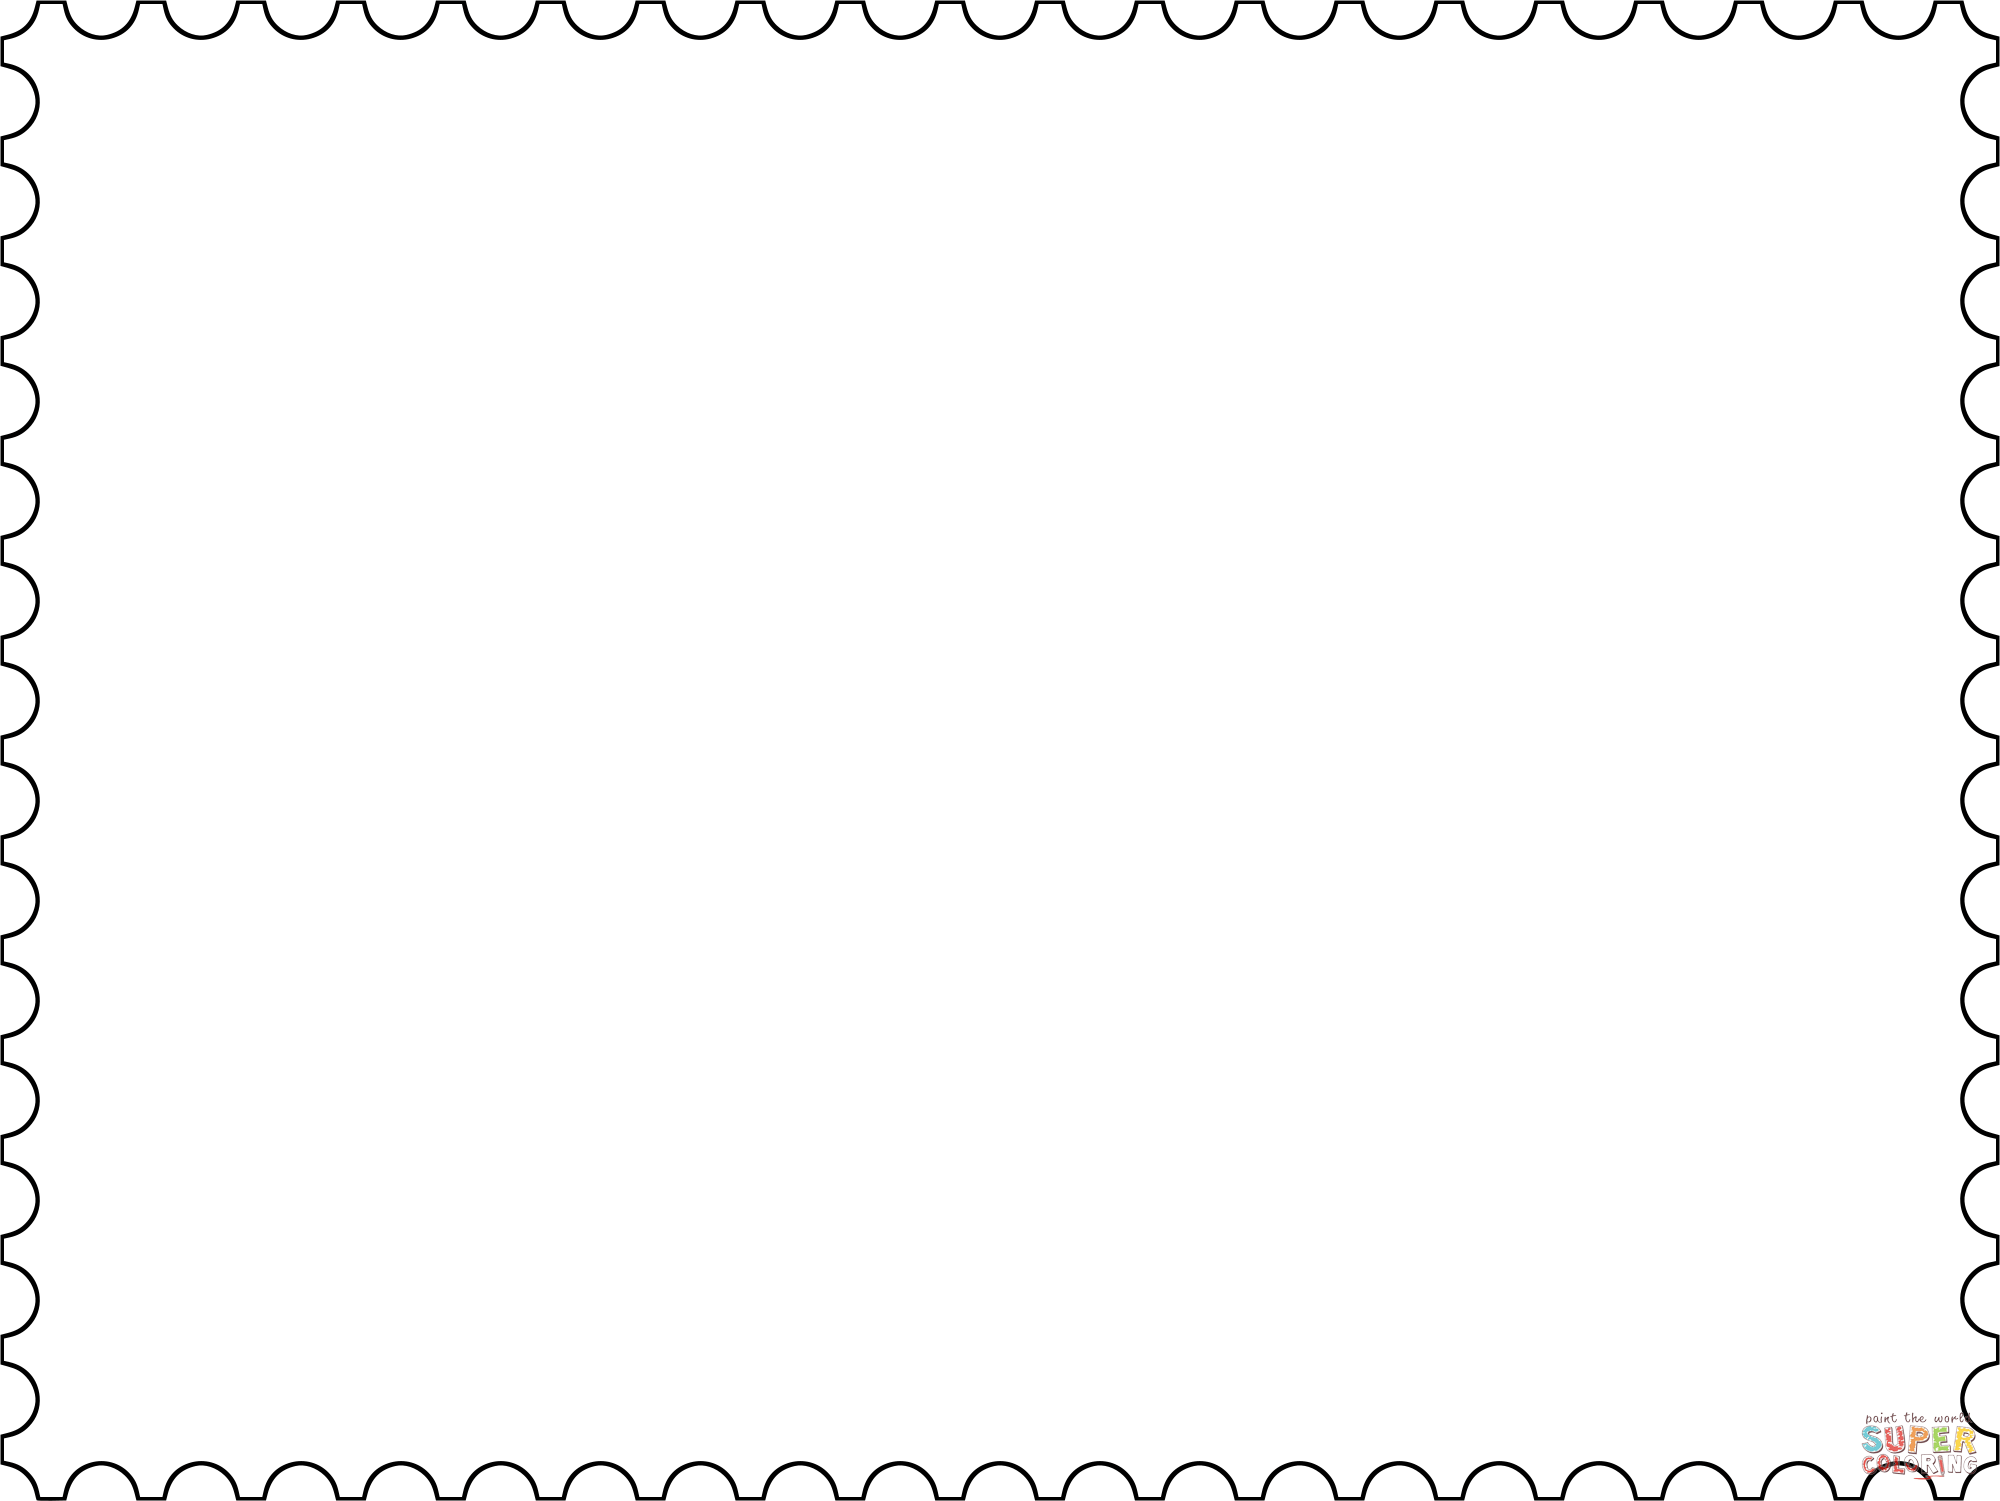 Postage stamp outline coloring page free printable coloring pages